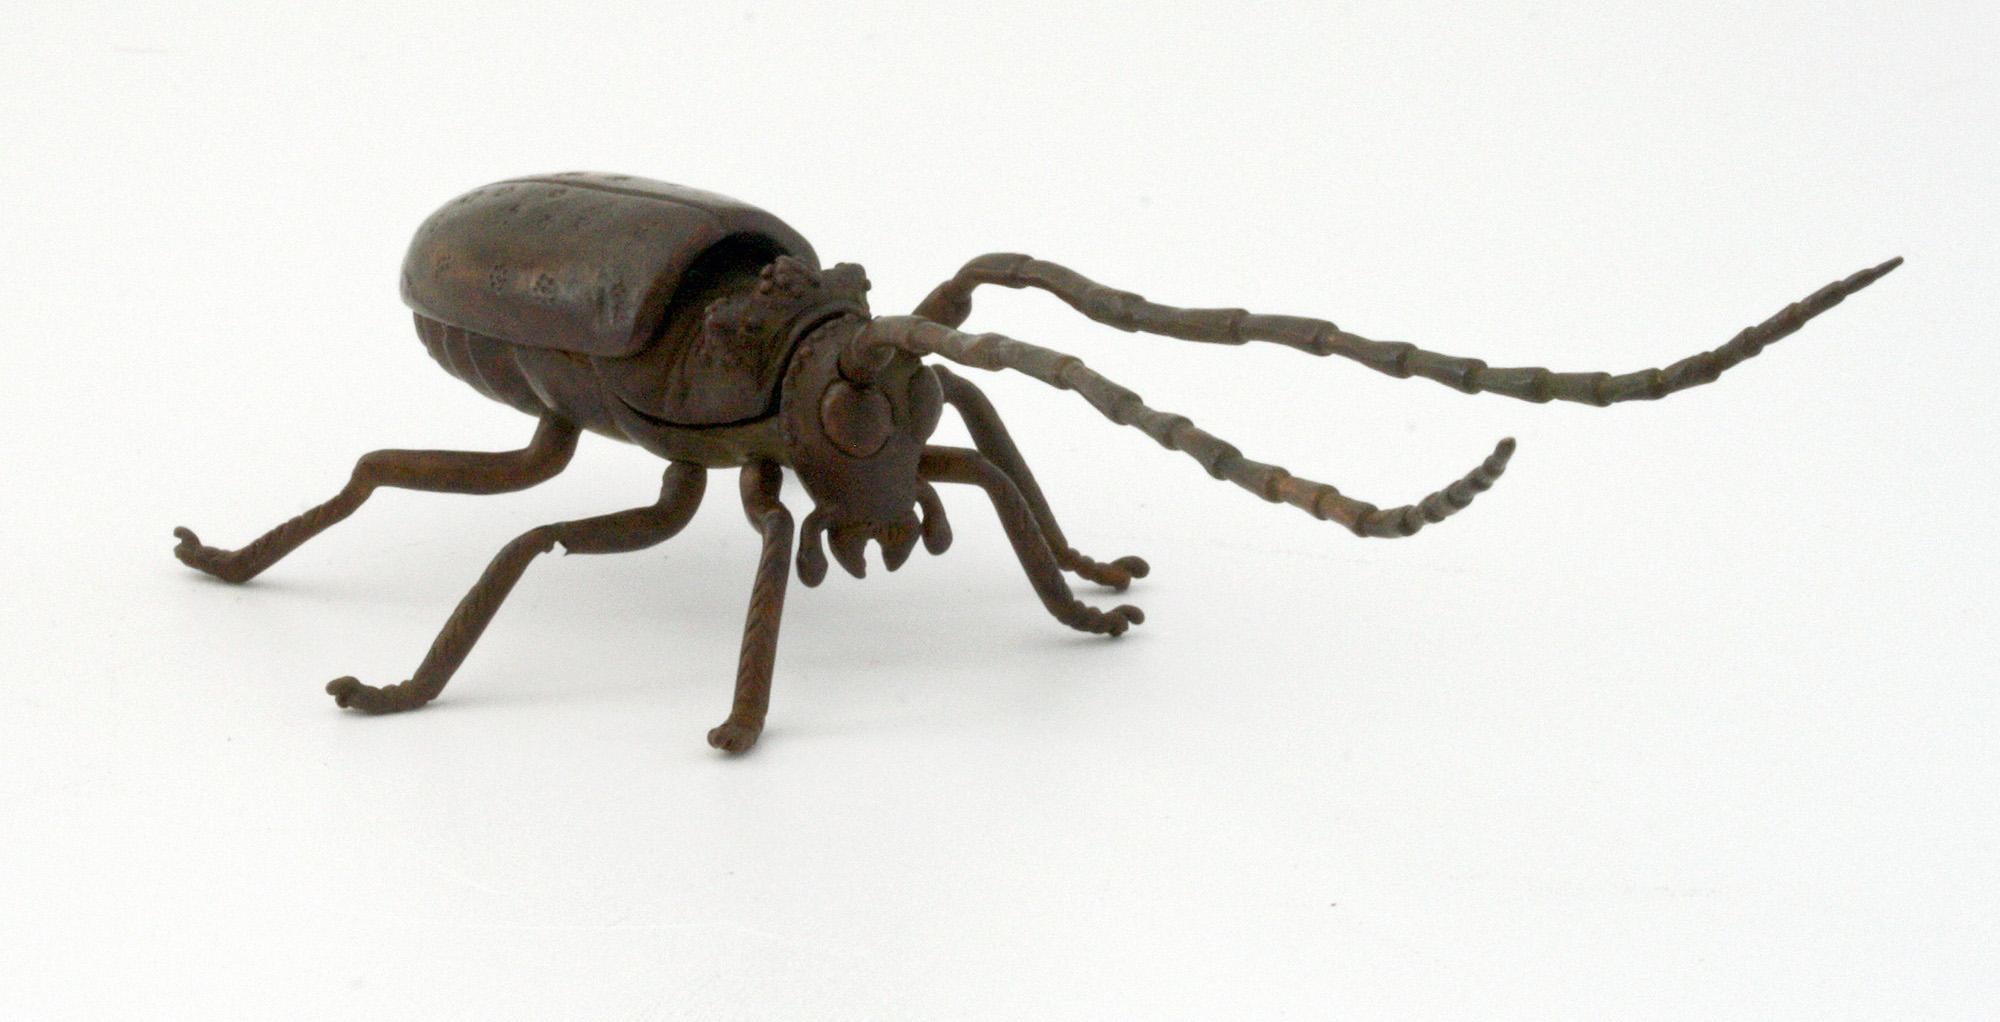 A scarce and finely made antique Japanese Meiji bronzed articulated figure of a flying beetle dating from the latter 19th century. The well detailed insect stands on its six legs, all freely moving and has two long antennae which also move with a